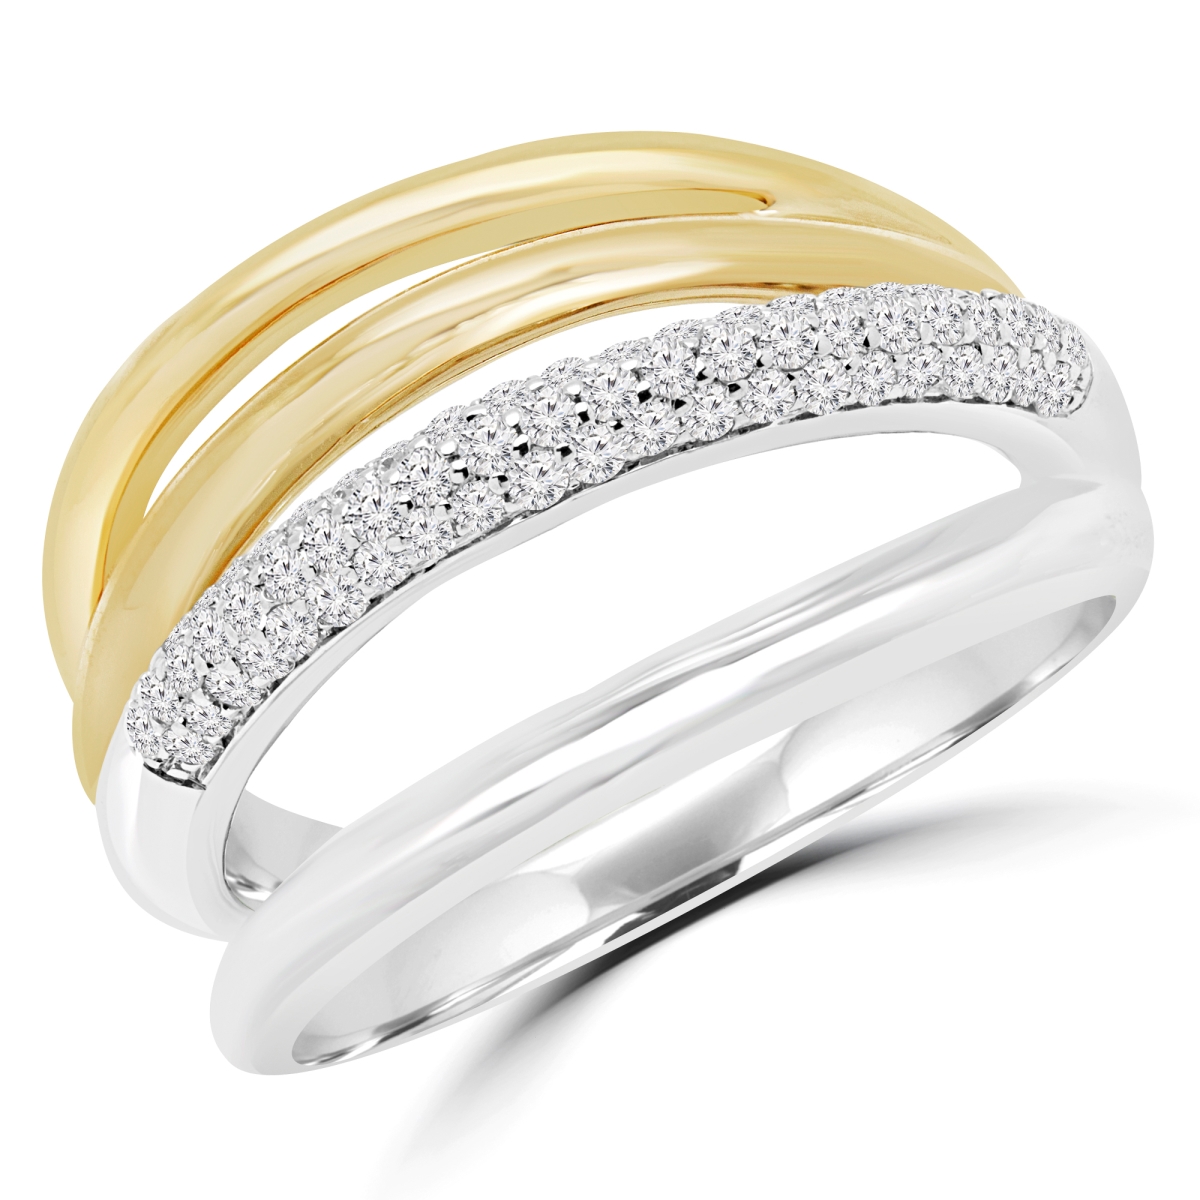 Picture of Majesty Diamonds MDR170050-5 0.37 CTW Round Diamond Cocktail Semi-Eternity Ring in 14K Two-Tone Gold - 5